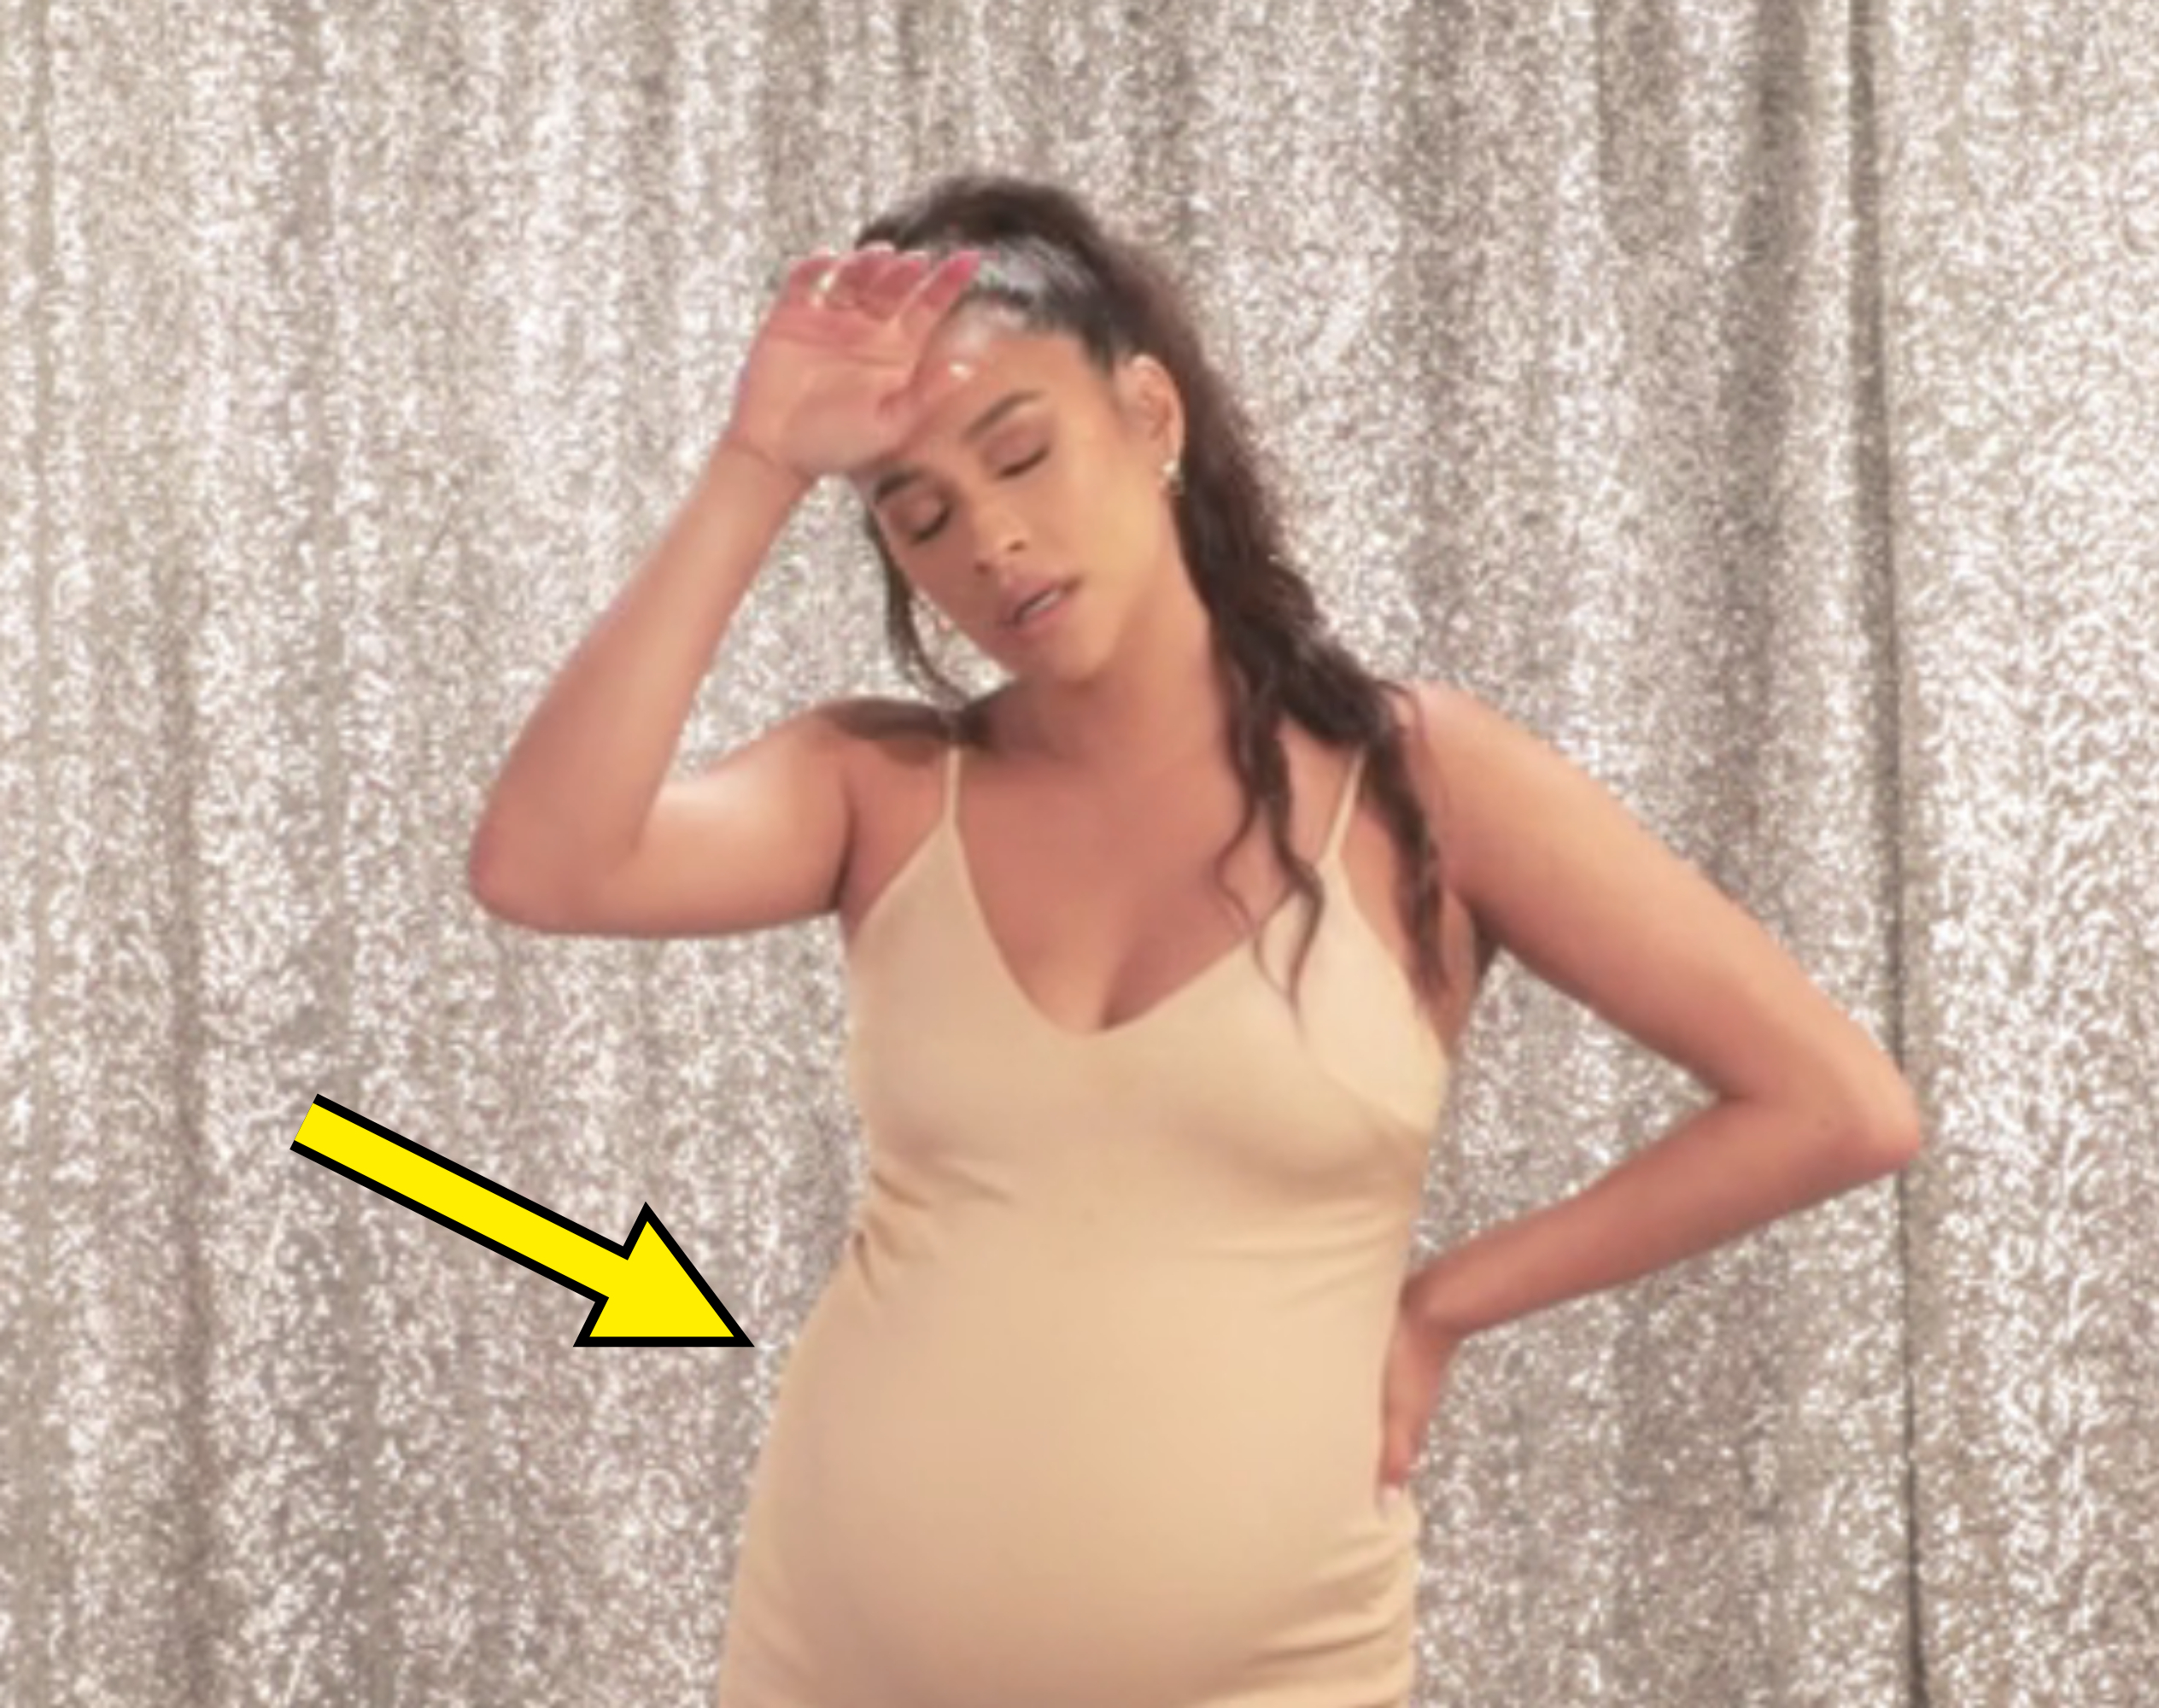 Pregnant woman in a beige dress standing with hand on forehead and hip, appearing tired or in discomfort